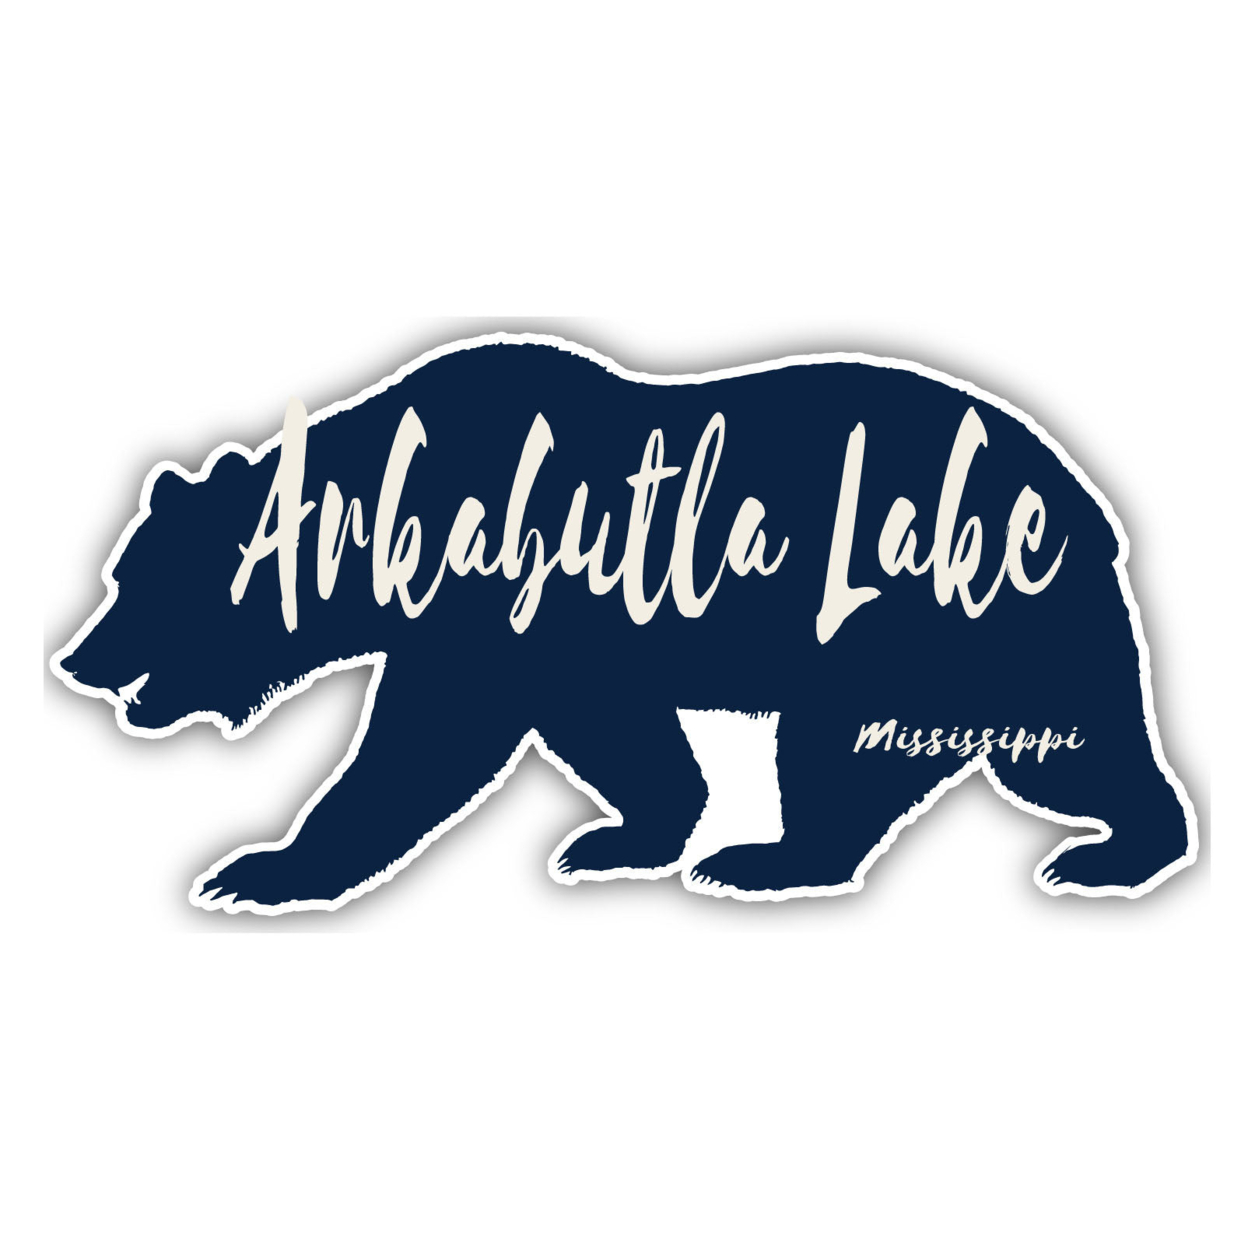 Arkabutla Lake Mississippi Souvenir Decorative Stickers (Choose Theme And Size) - 4-Pack, 10-Inch, Bear